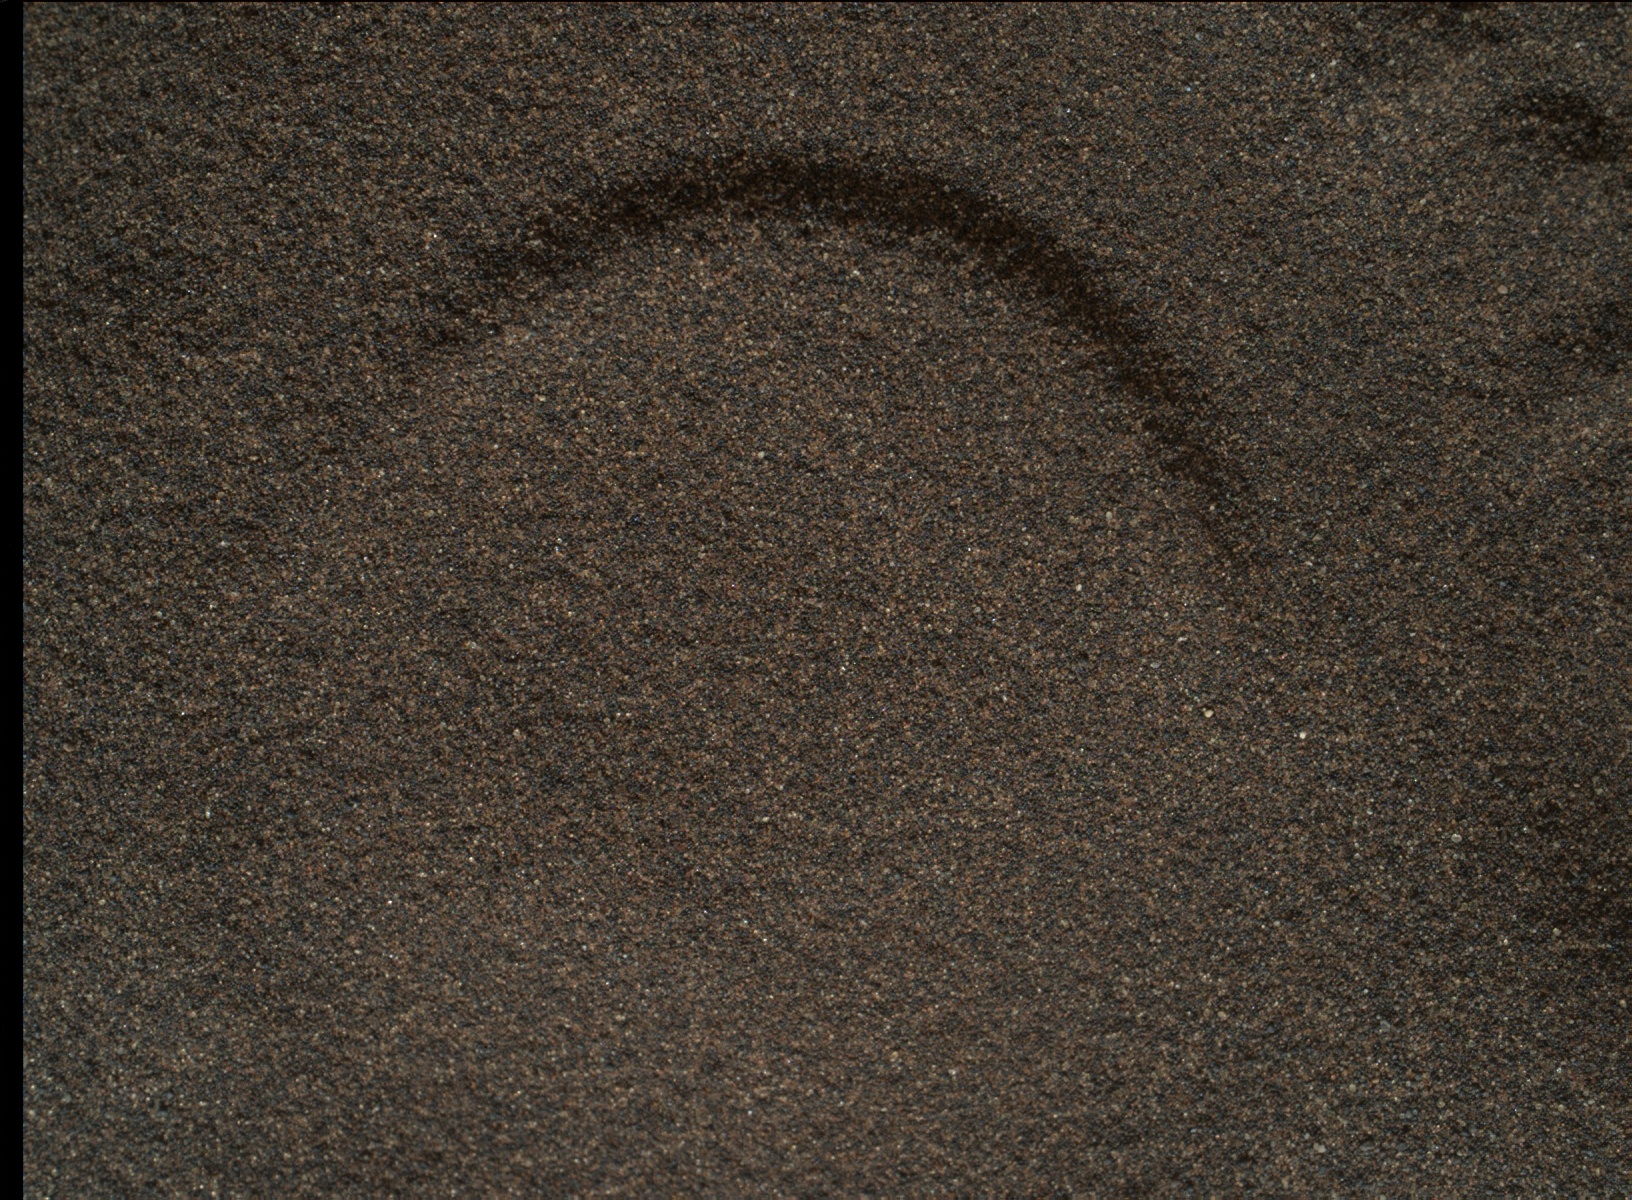 Nasa's Mars rover Curiosity acquired this image using its Mars Hand Lens Imager (MAHLI) on Sol 1603